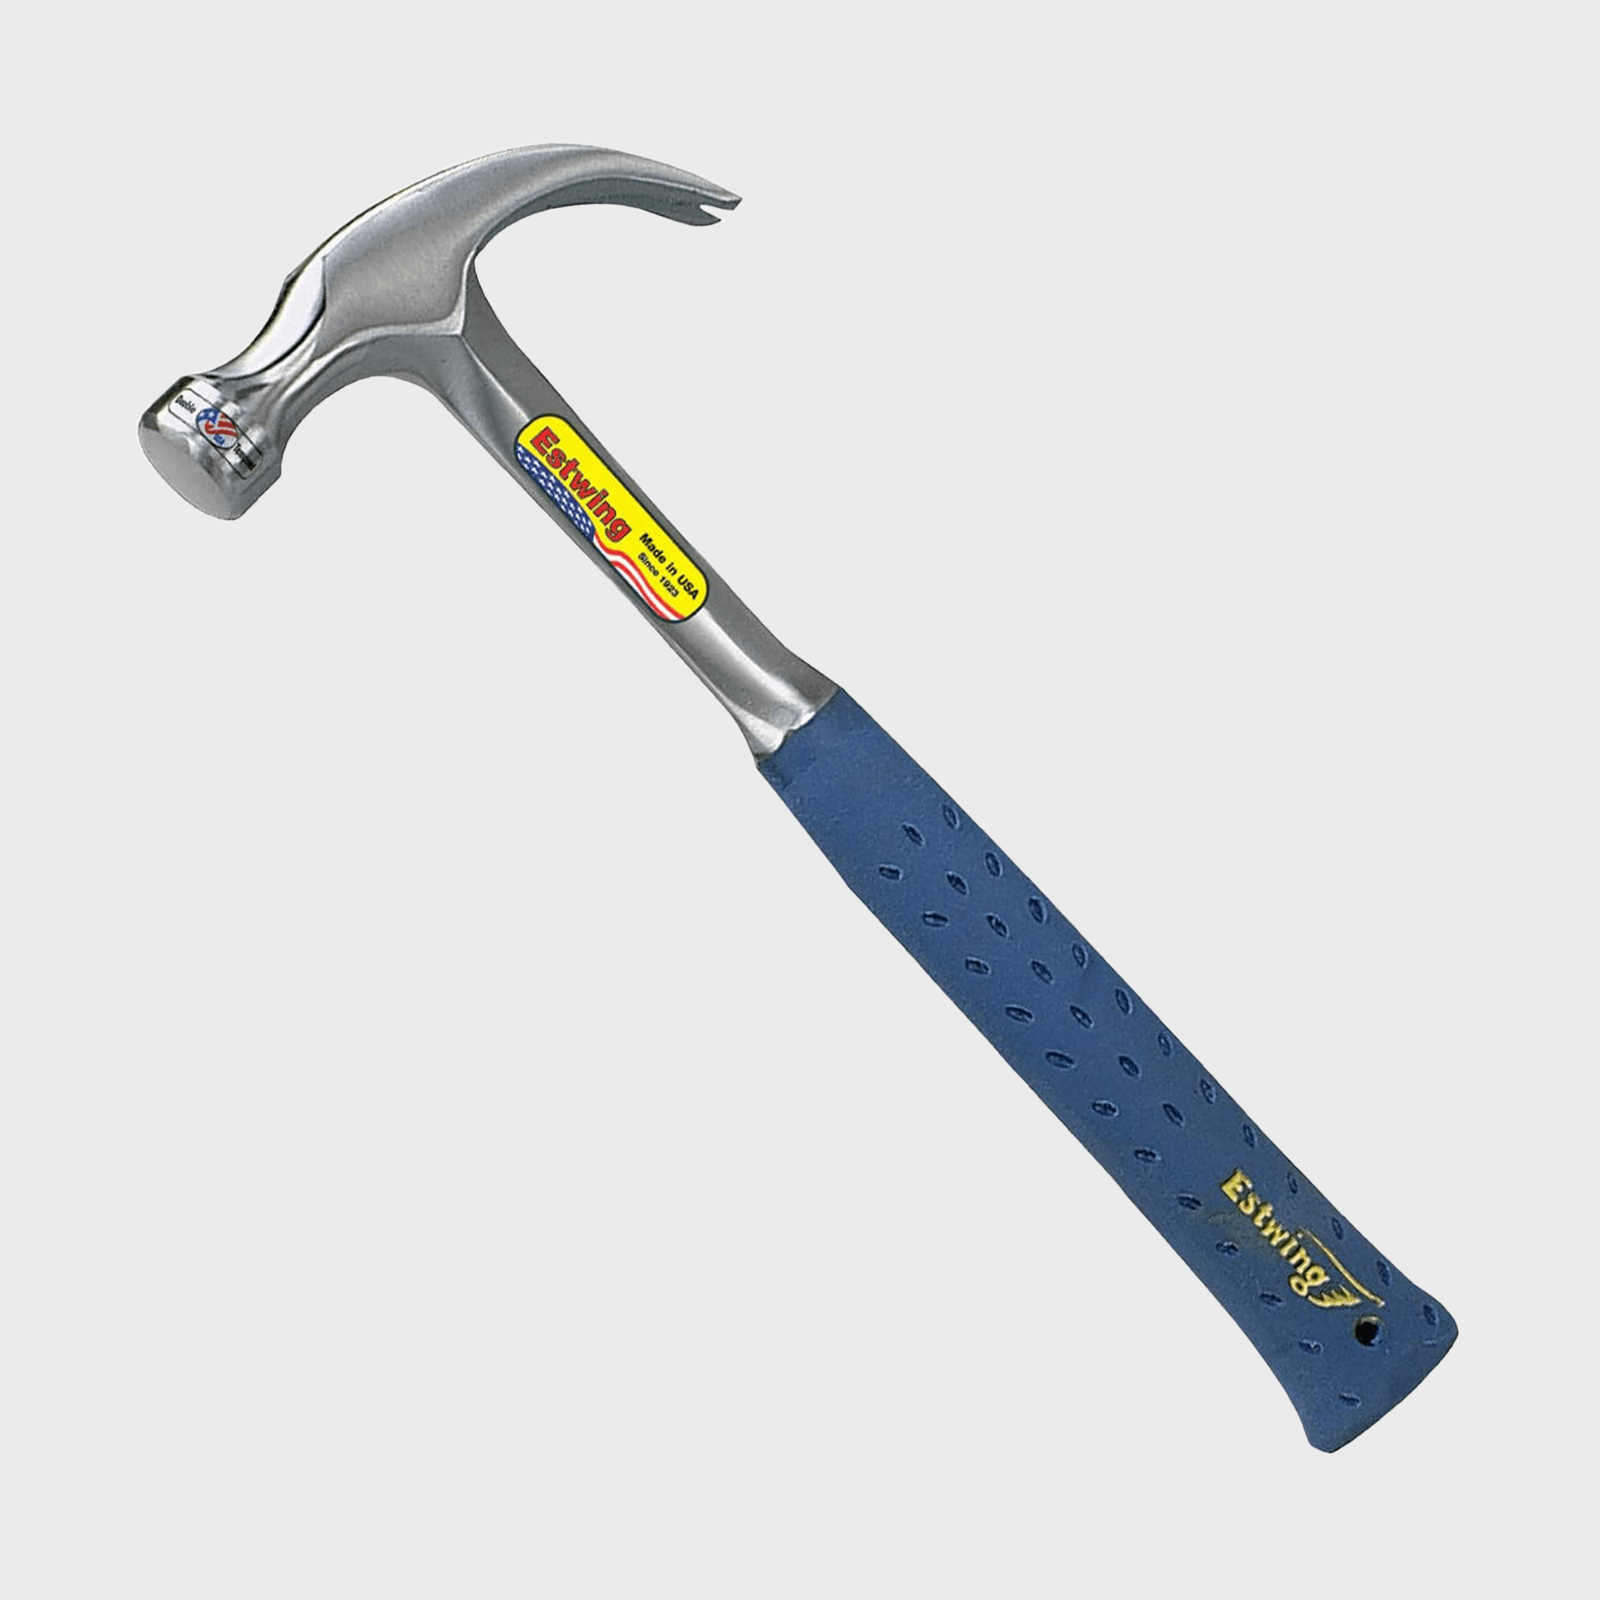 Heavy Duty Claw Hammer for Construction - 16 oz. Framing Hammer with  Reinforced Build and Stainless Steel Head 13 Inch Hammer for Home  Improvement by Mantium : Amazon.in: Home Improvement